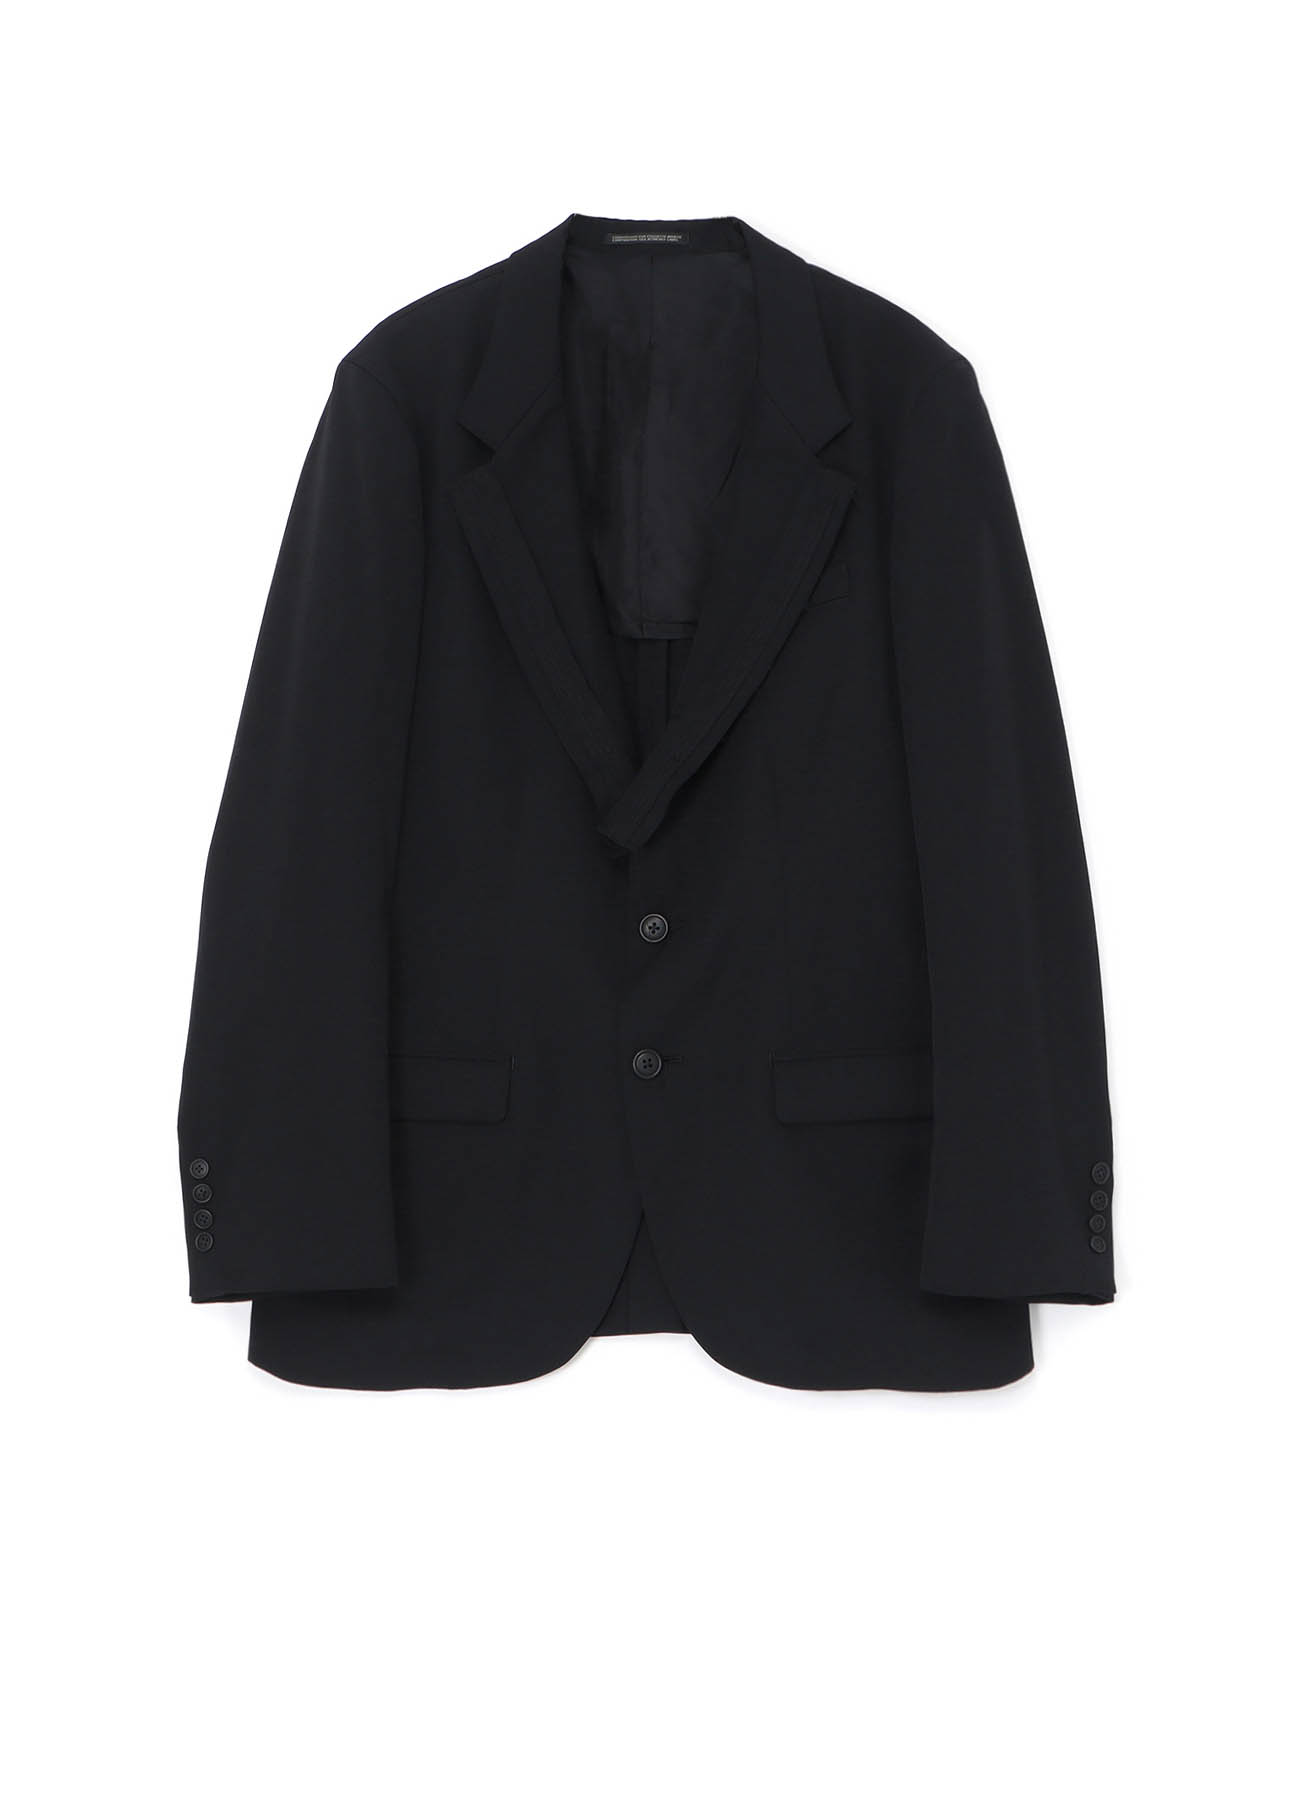 WOOL GABARDINE 3-BUTTONS JACKET WITH DECORATIVE CLOTH